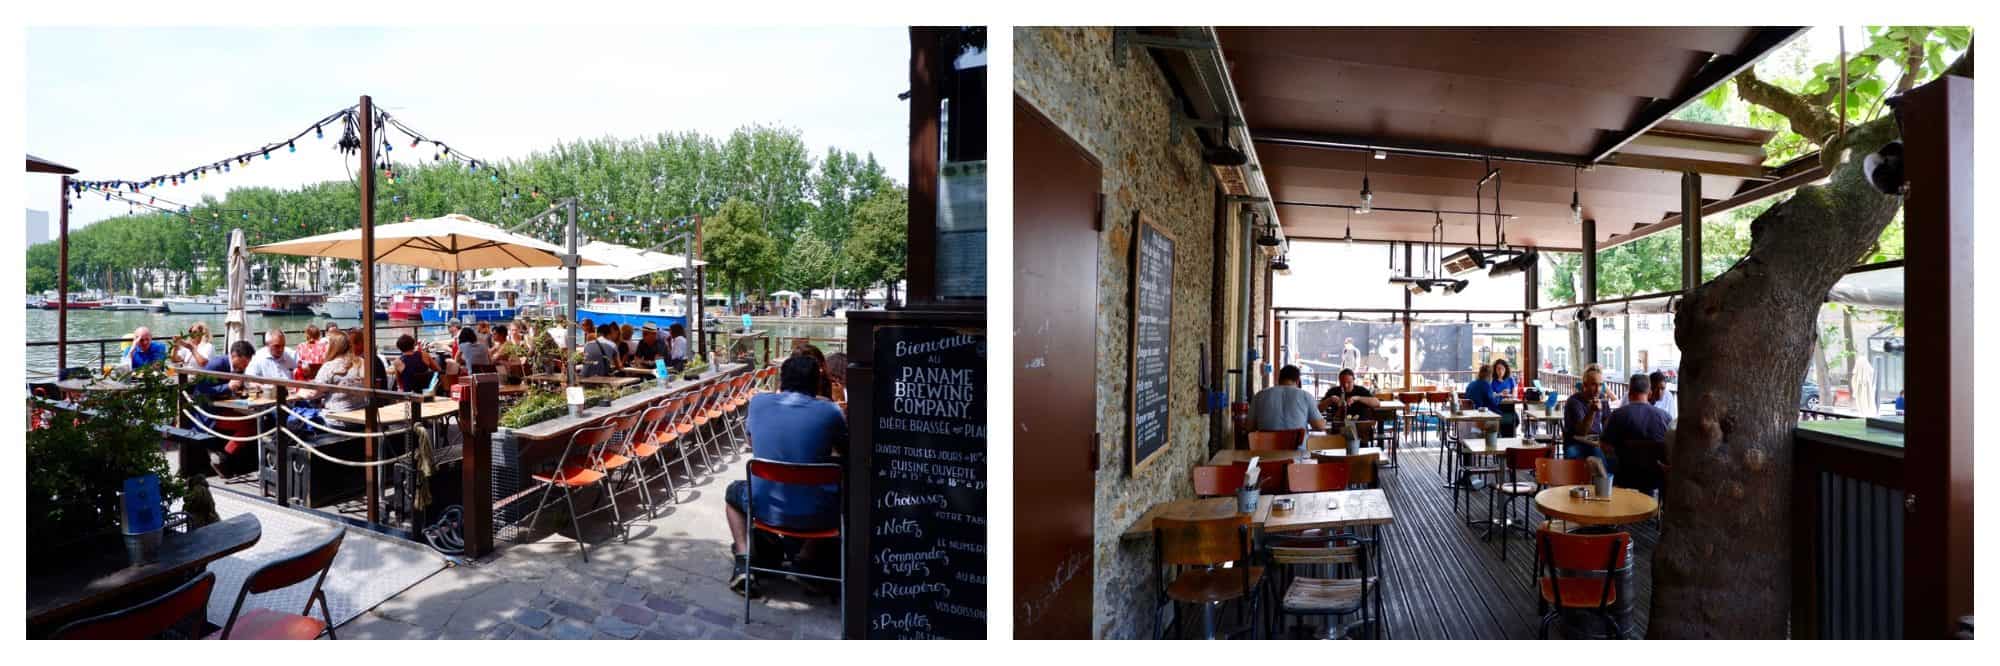 The terrace right on the water at the Paname Brewing Company in Paris (left) and the bar's covered terrace with canal views (right).